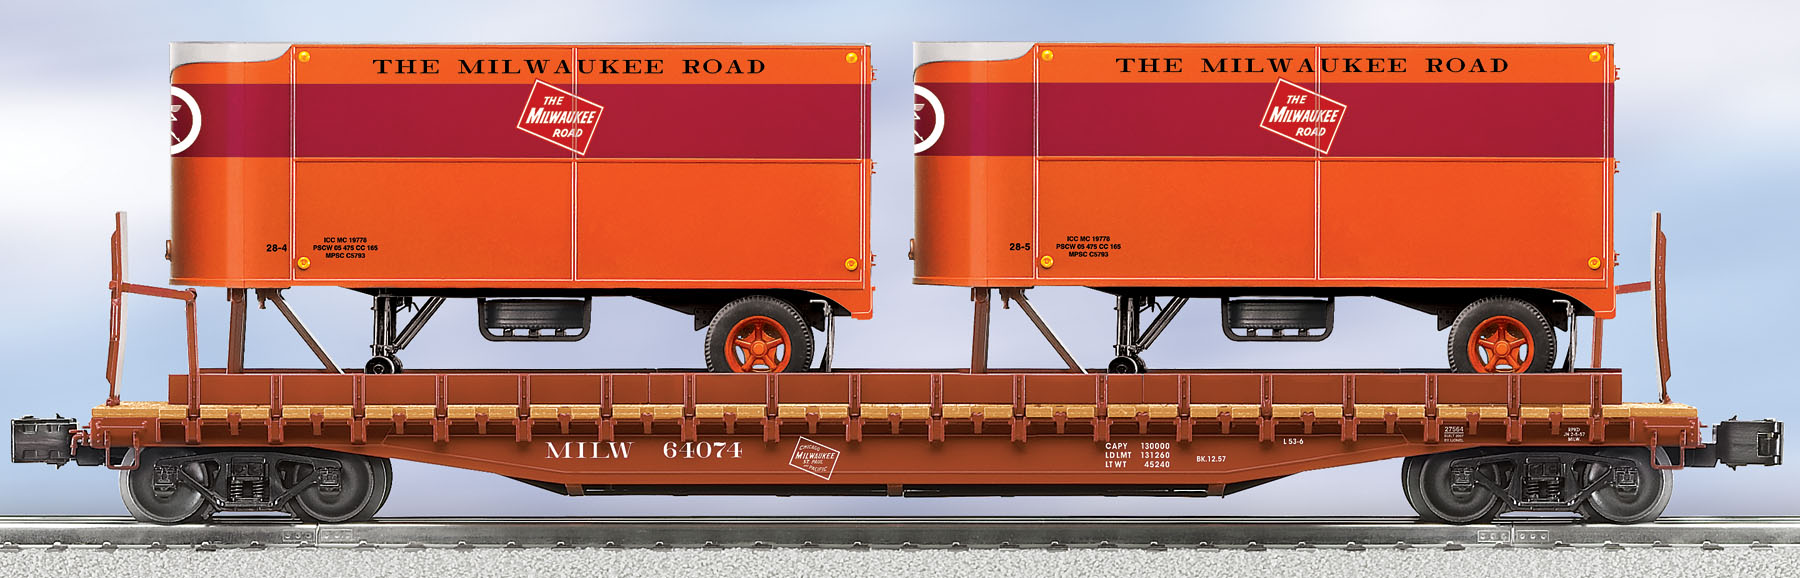 Milwaukee Road PS-4 Flatcar with Piggyback Trailers image